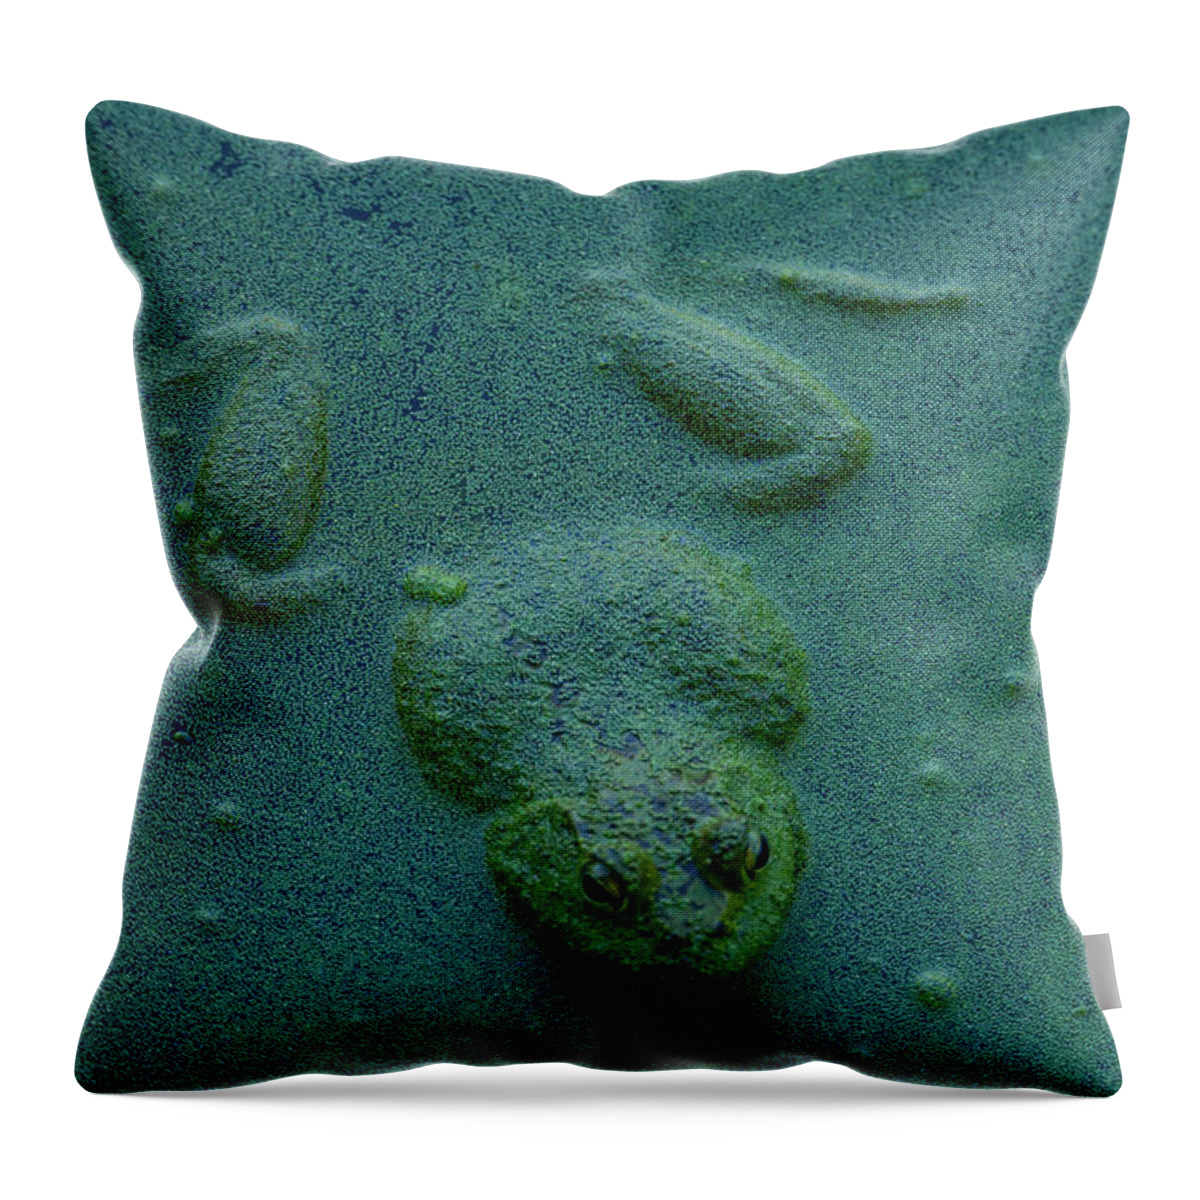 Frog Throw Pillow featuring the photograph Frog by Jerry Cahill